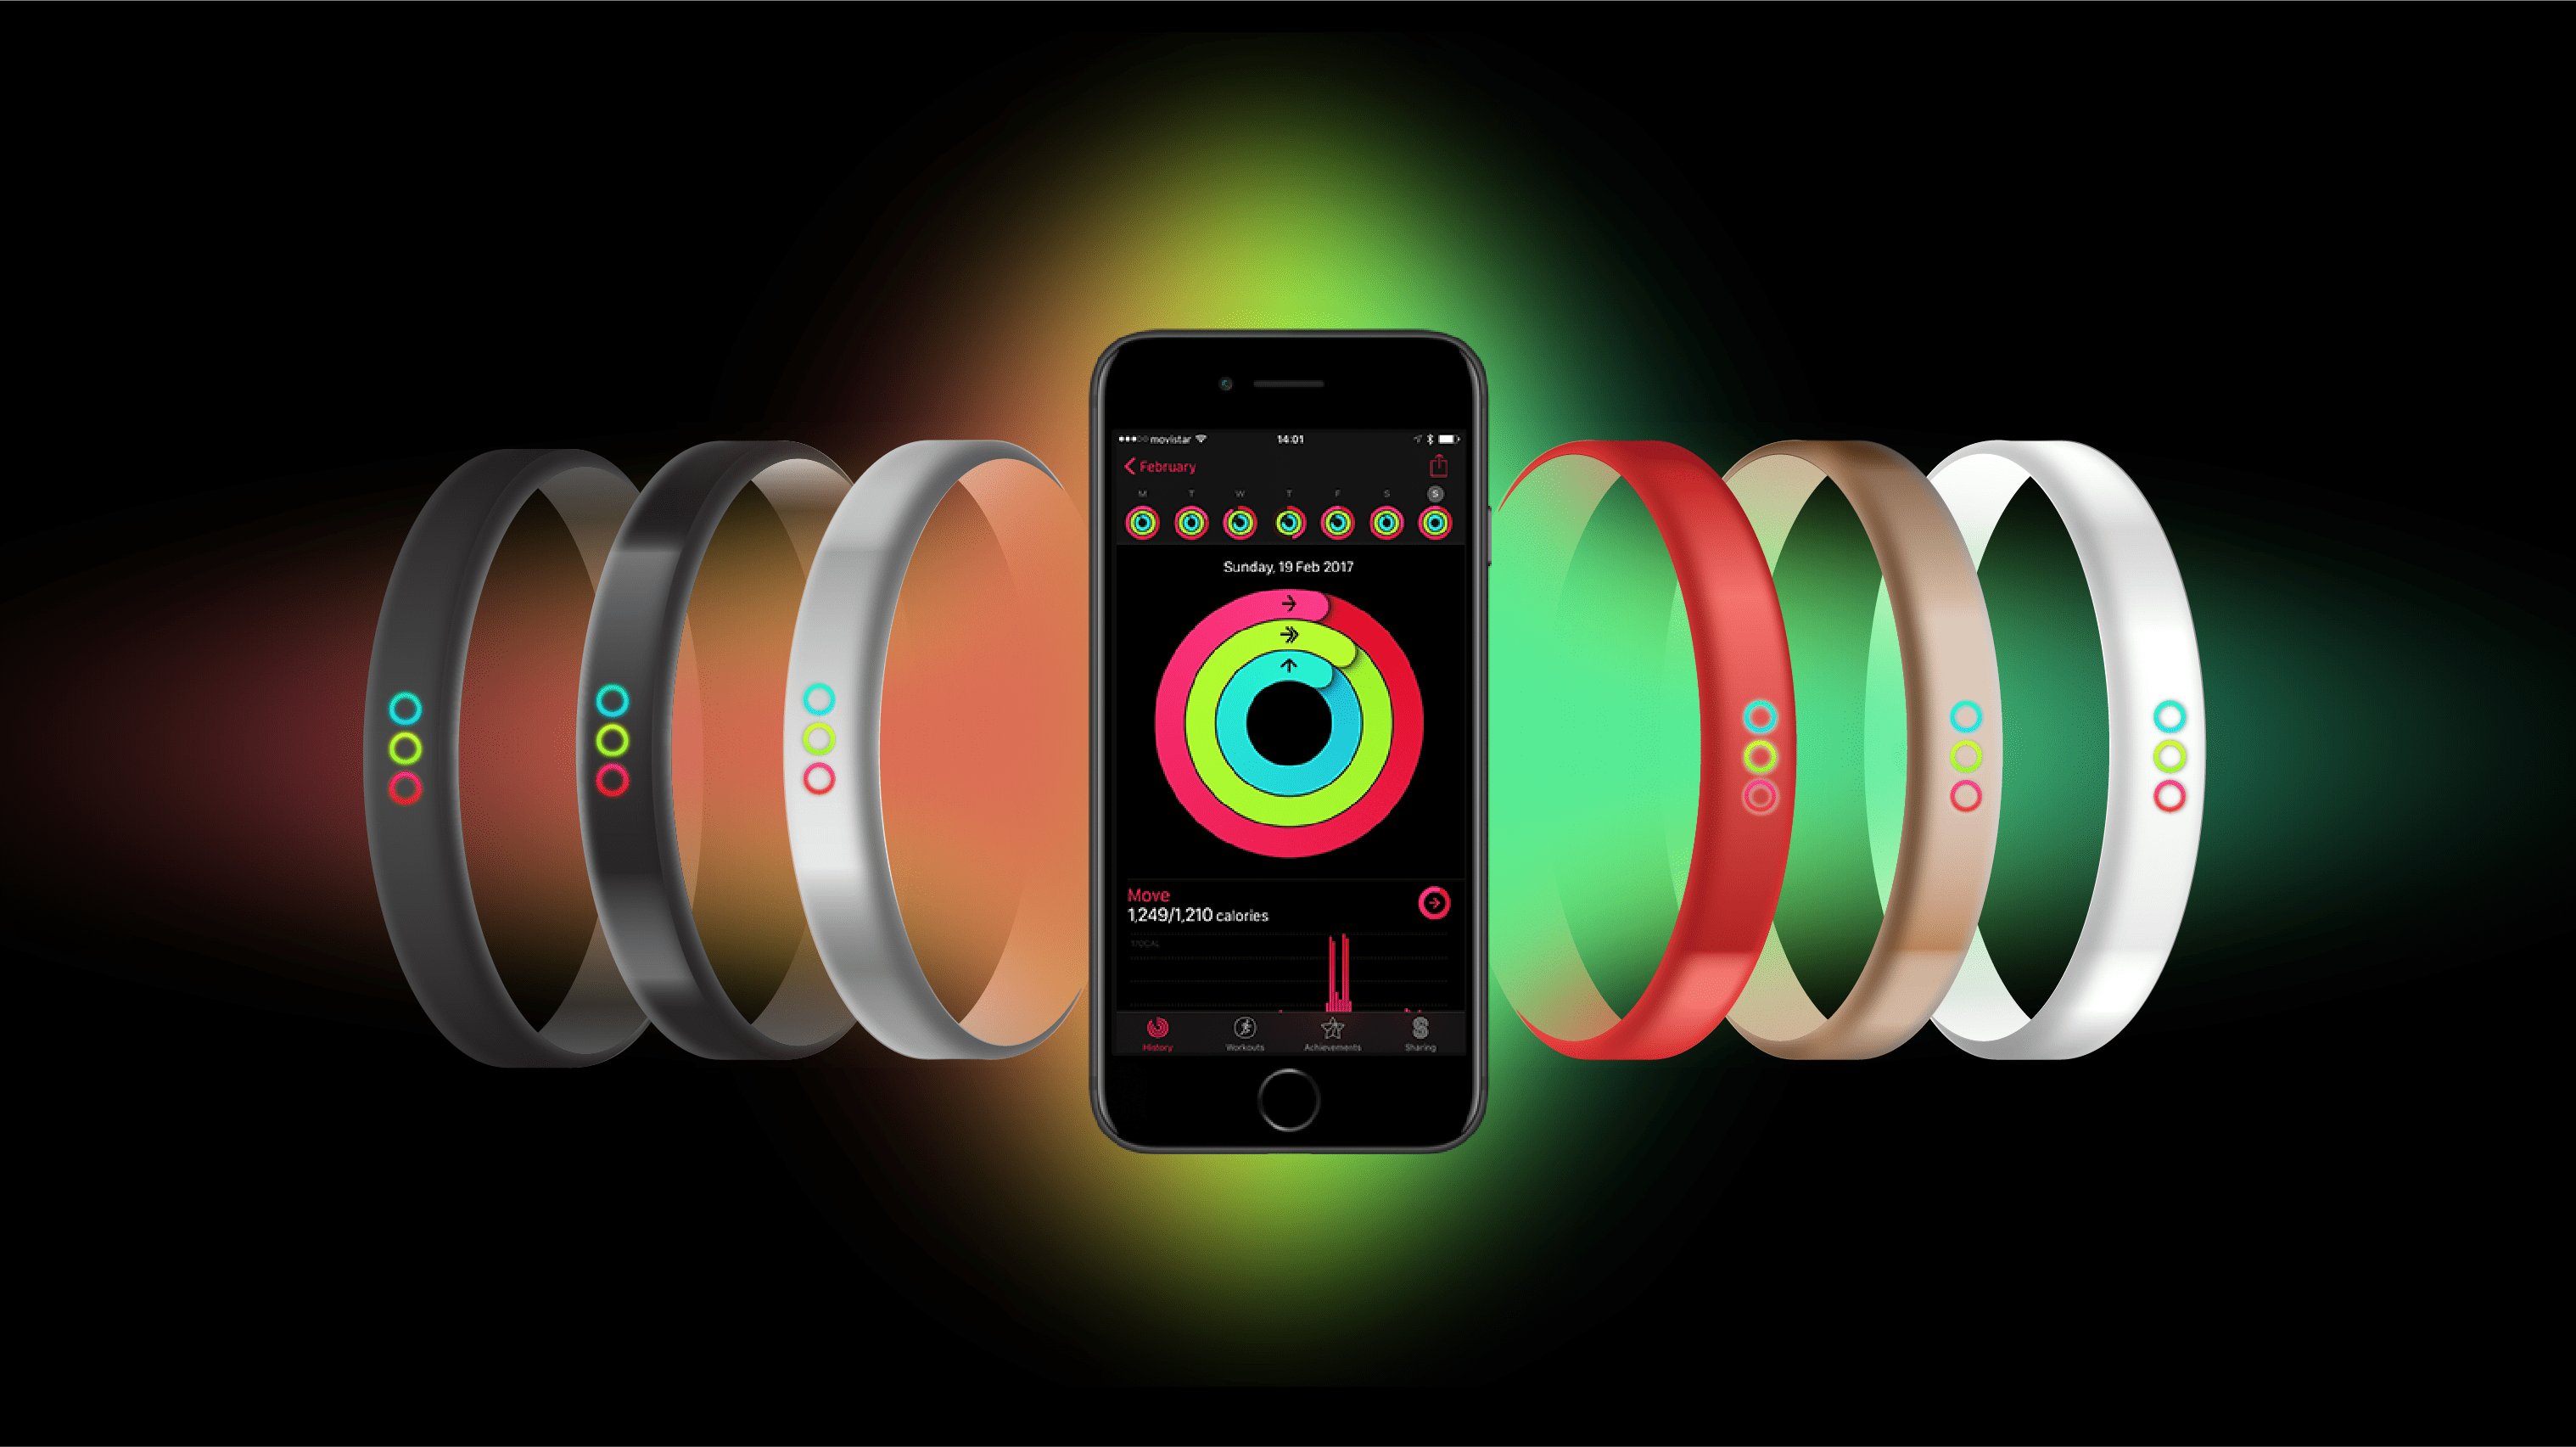 A no-frills Apple fitness tracker could get new users hooked on the Activity app.